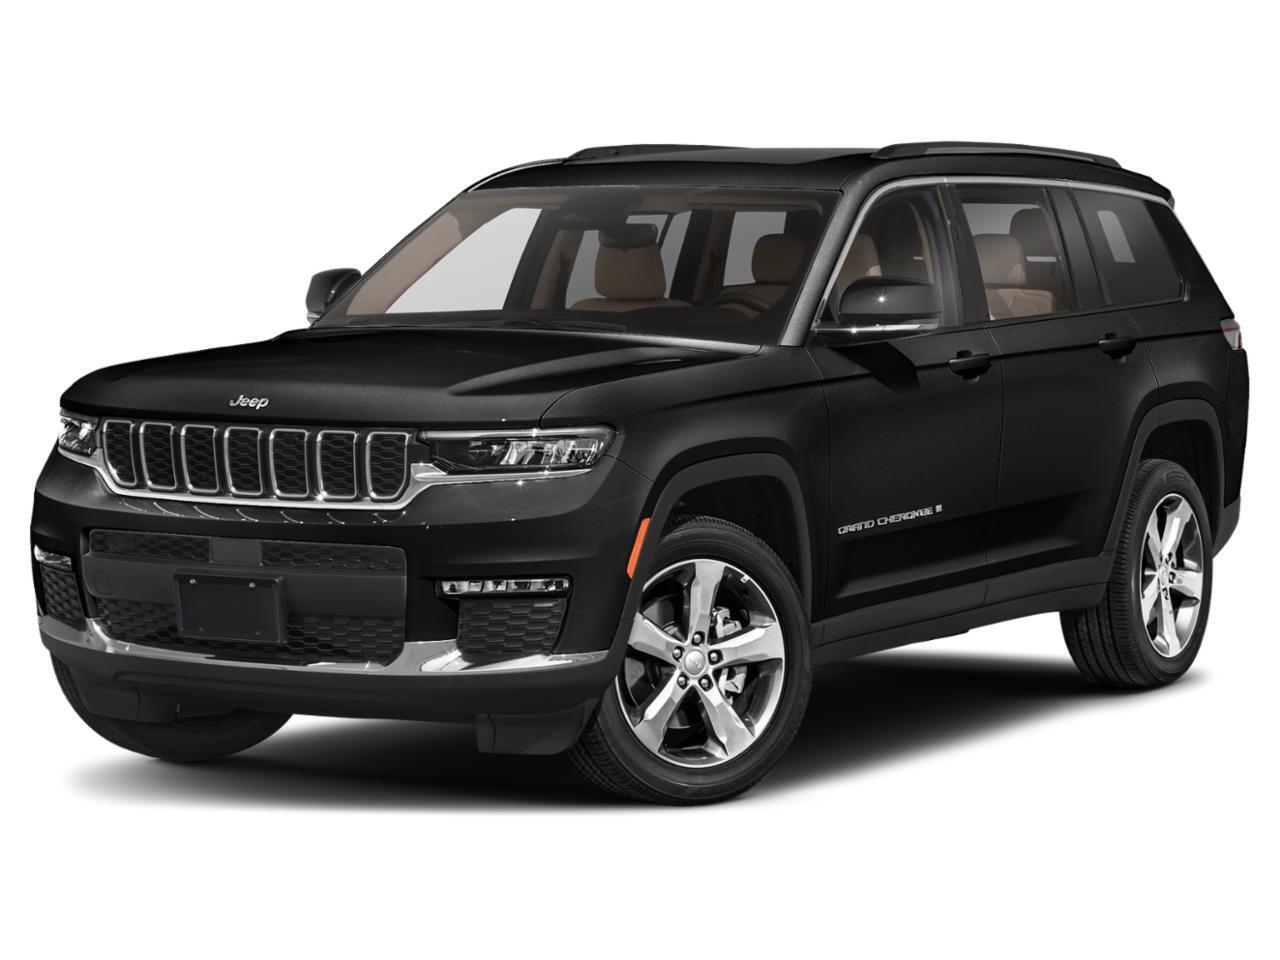 2021 Jeep Grand Cherokee L SUMMIT IN DIAMOND BLACK EQUIPPED WITH A 3.6L V6 , 